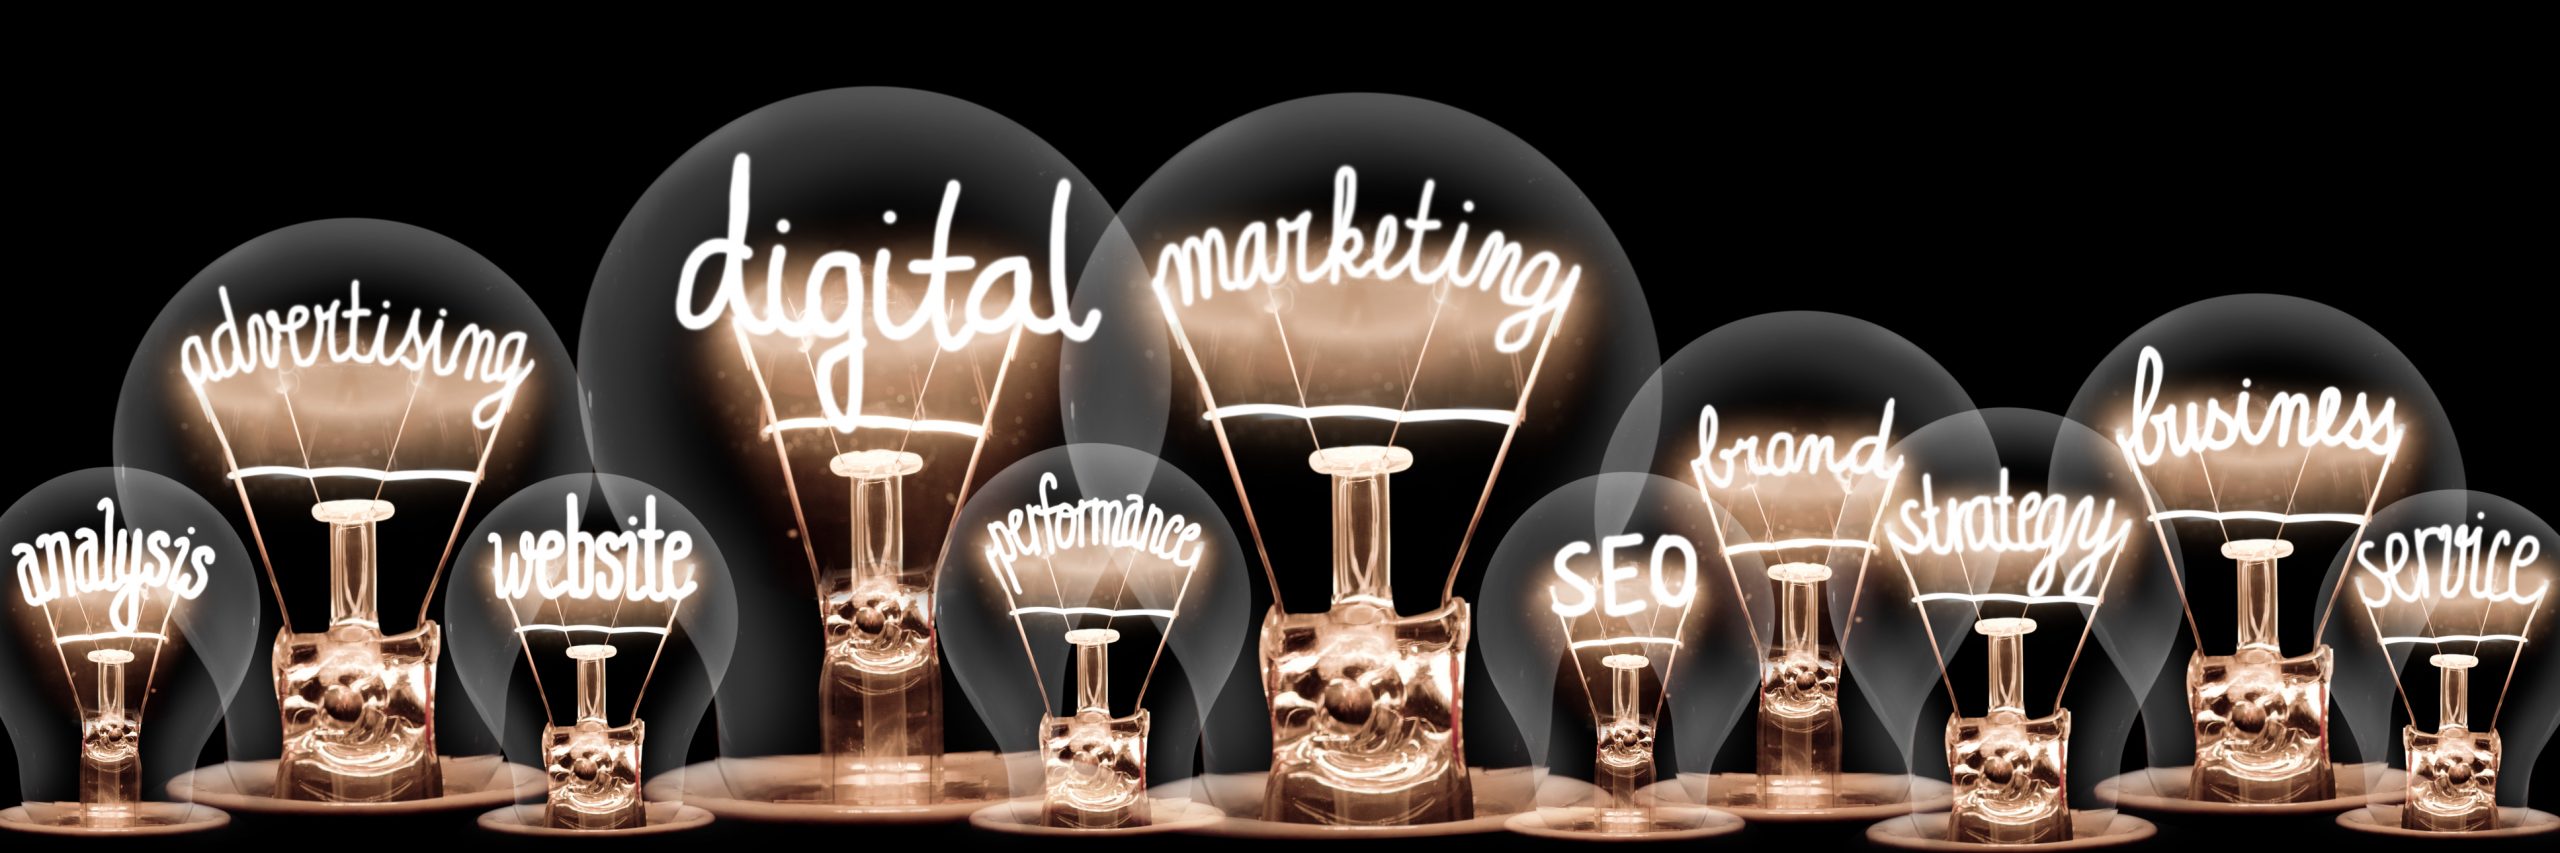 What is digital marketing and why is it important for business success?